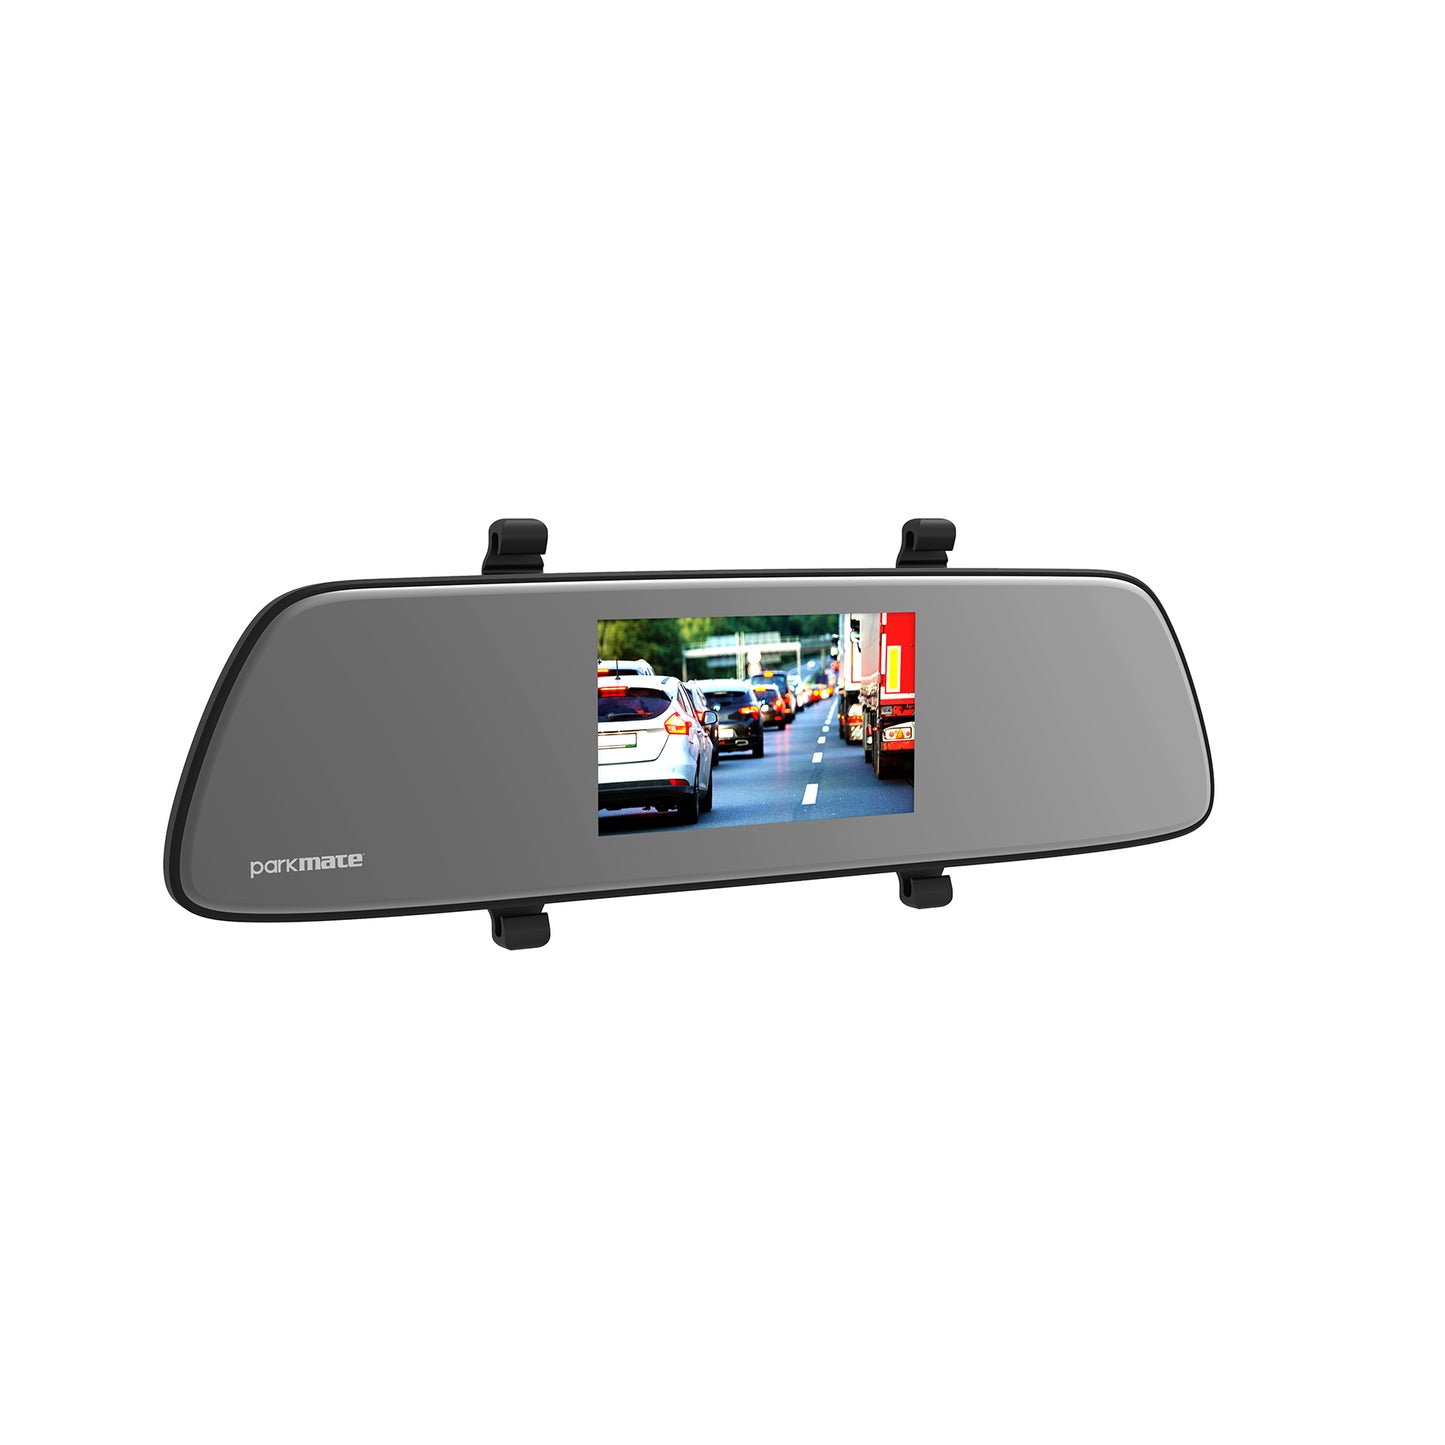 5.0” Touch Screen Mirror DVR with 1080p Front and Rear Recording